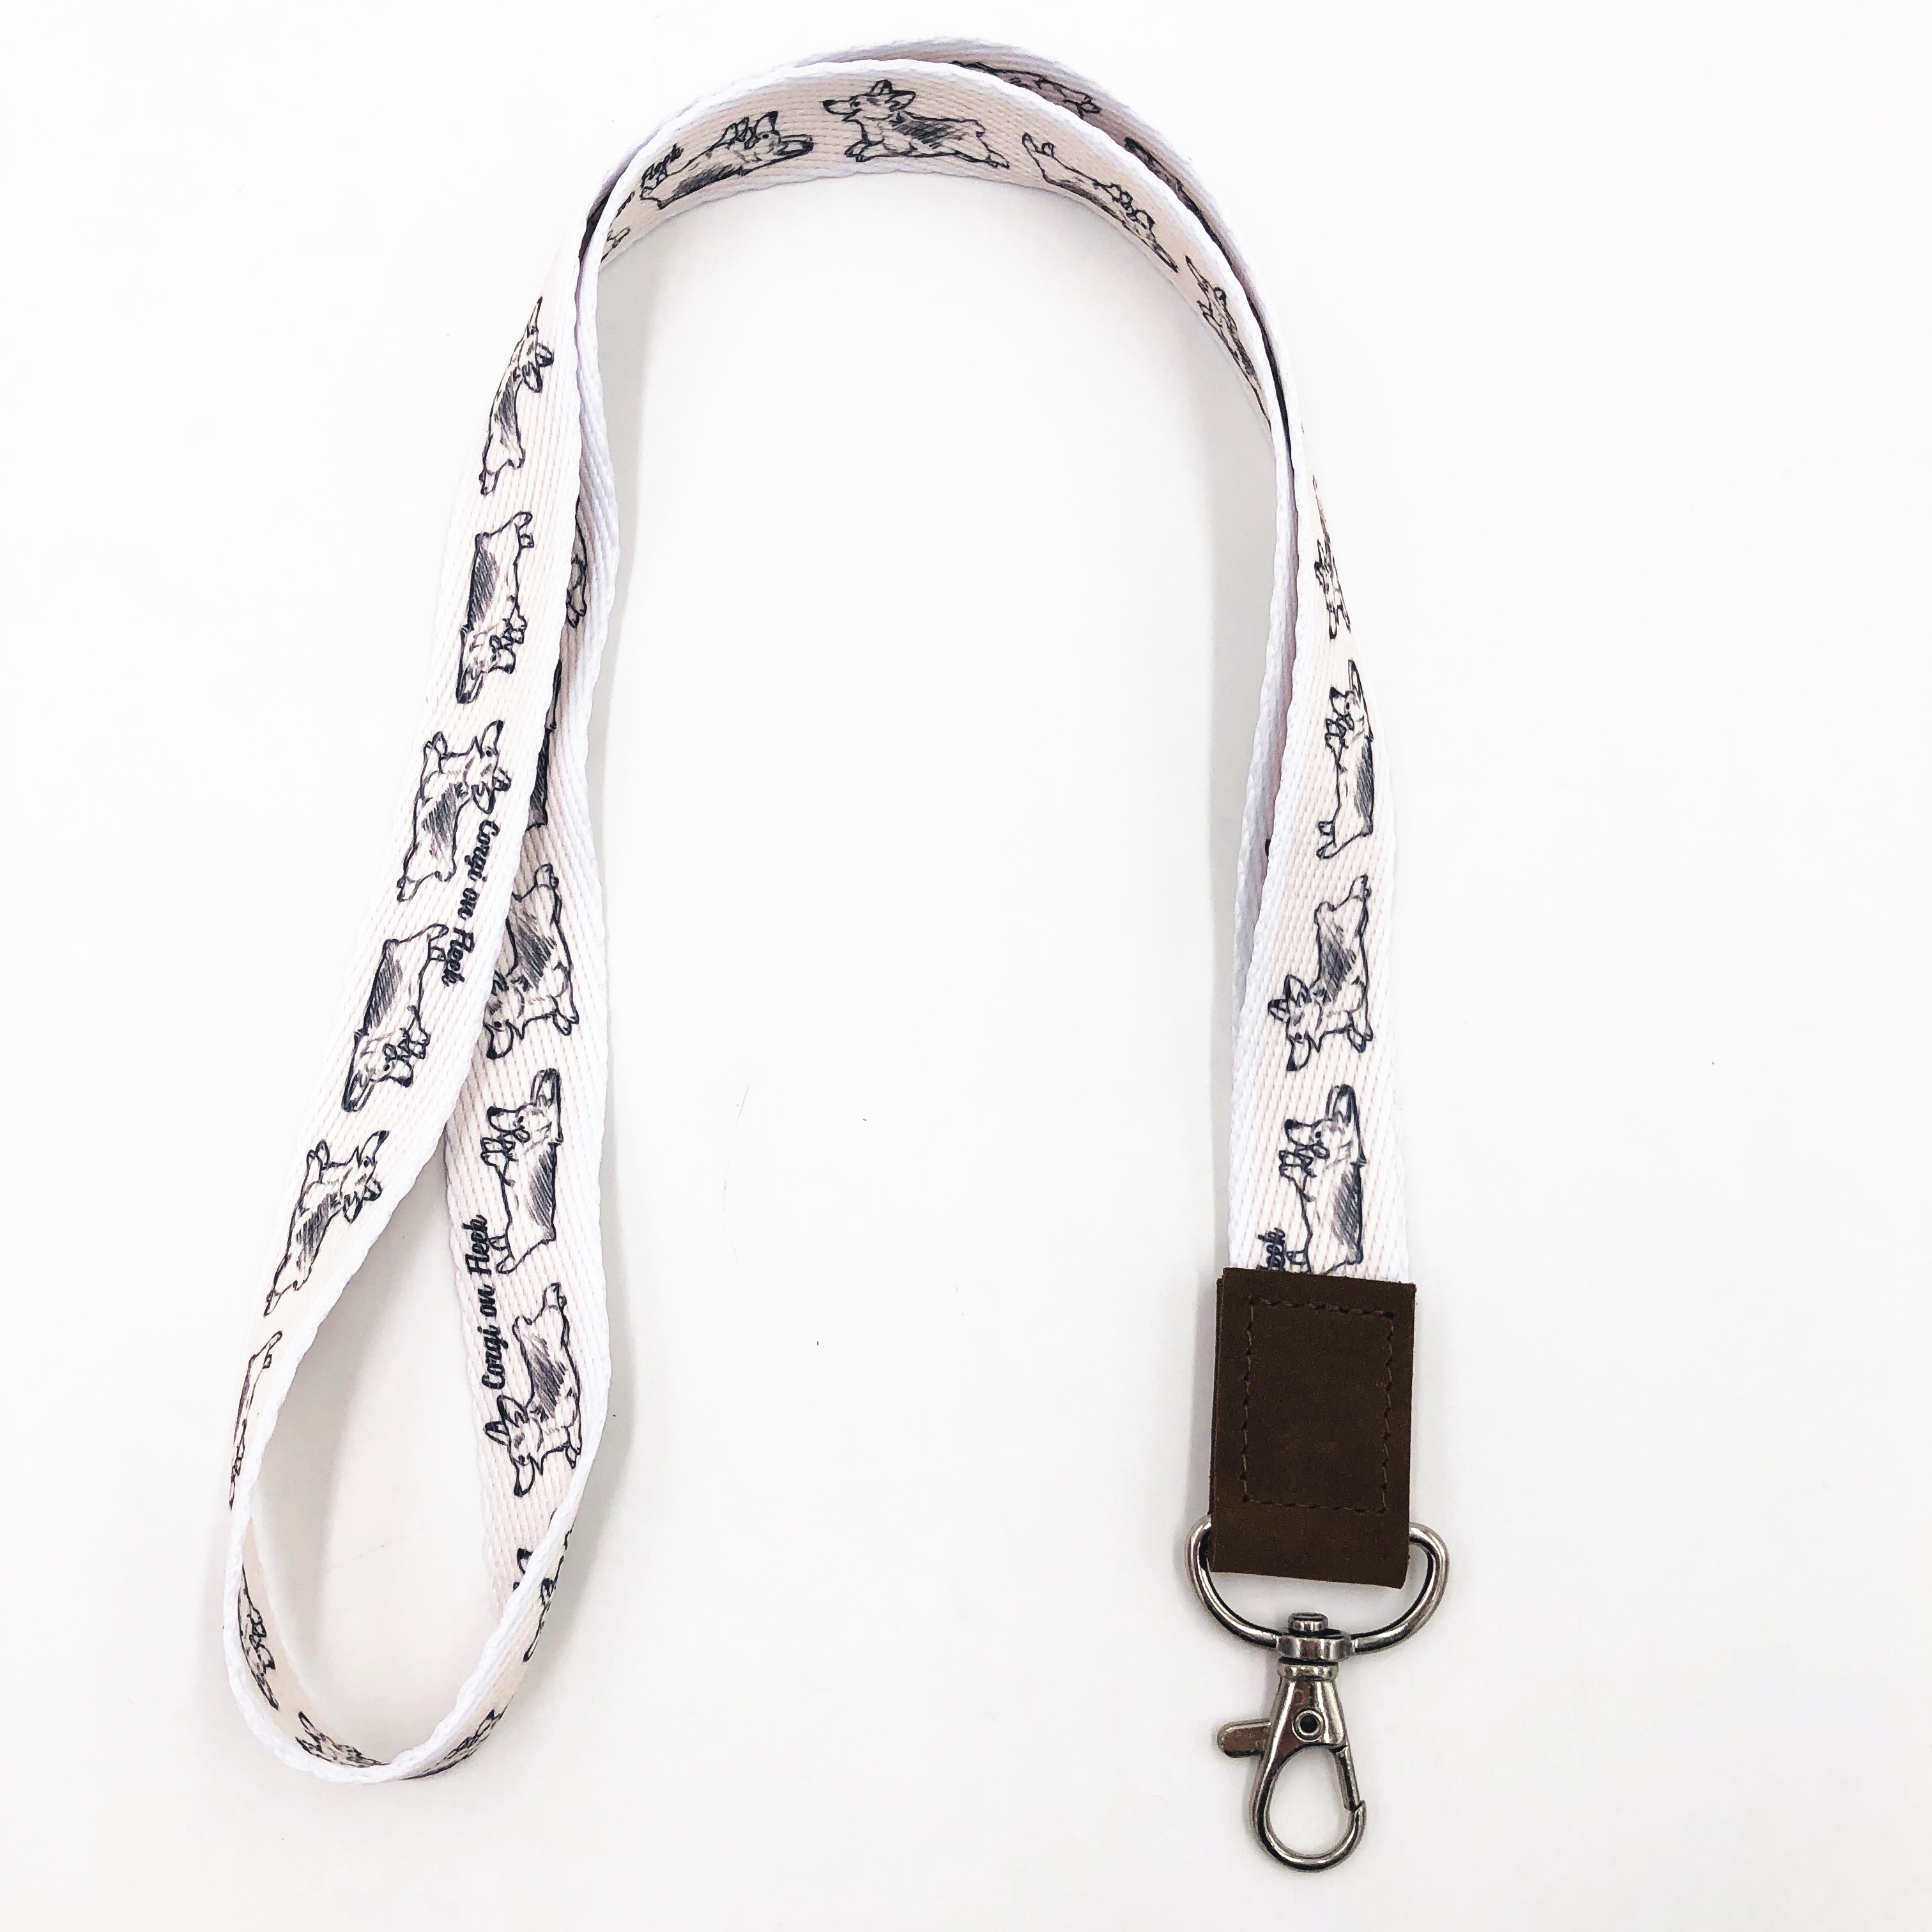 Lanyard with id Holder Cute Lanyards for Women Lanyard for Keys ID Badge Holder